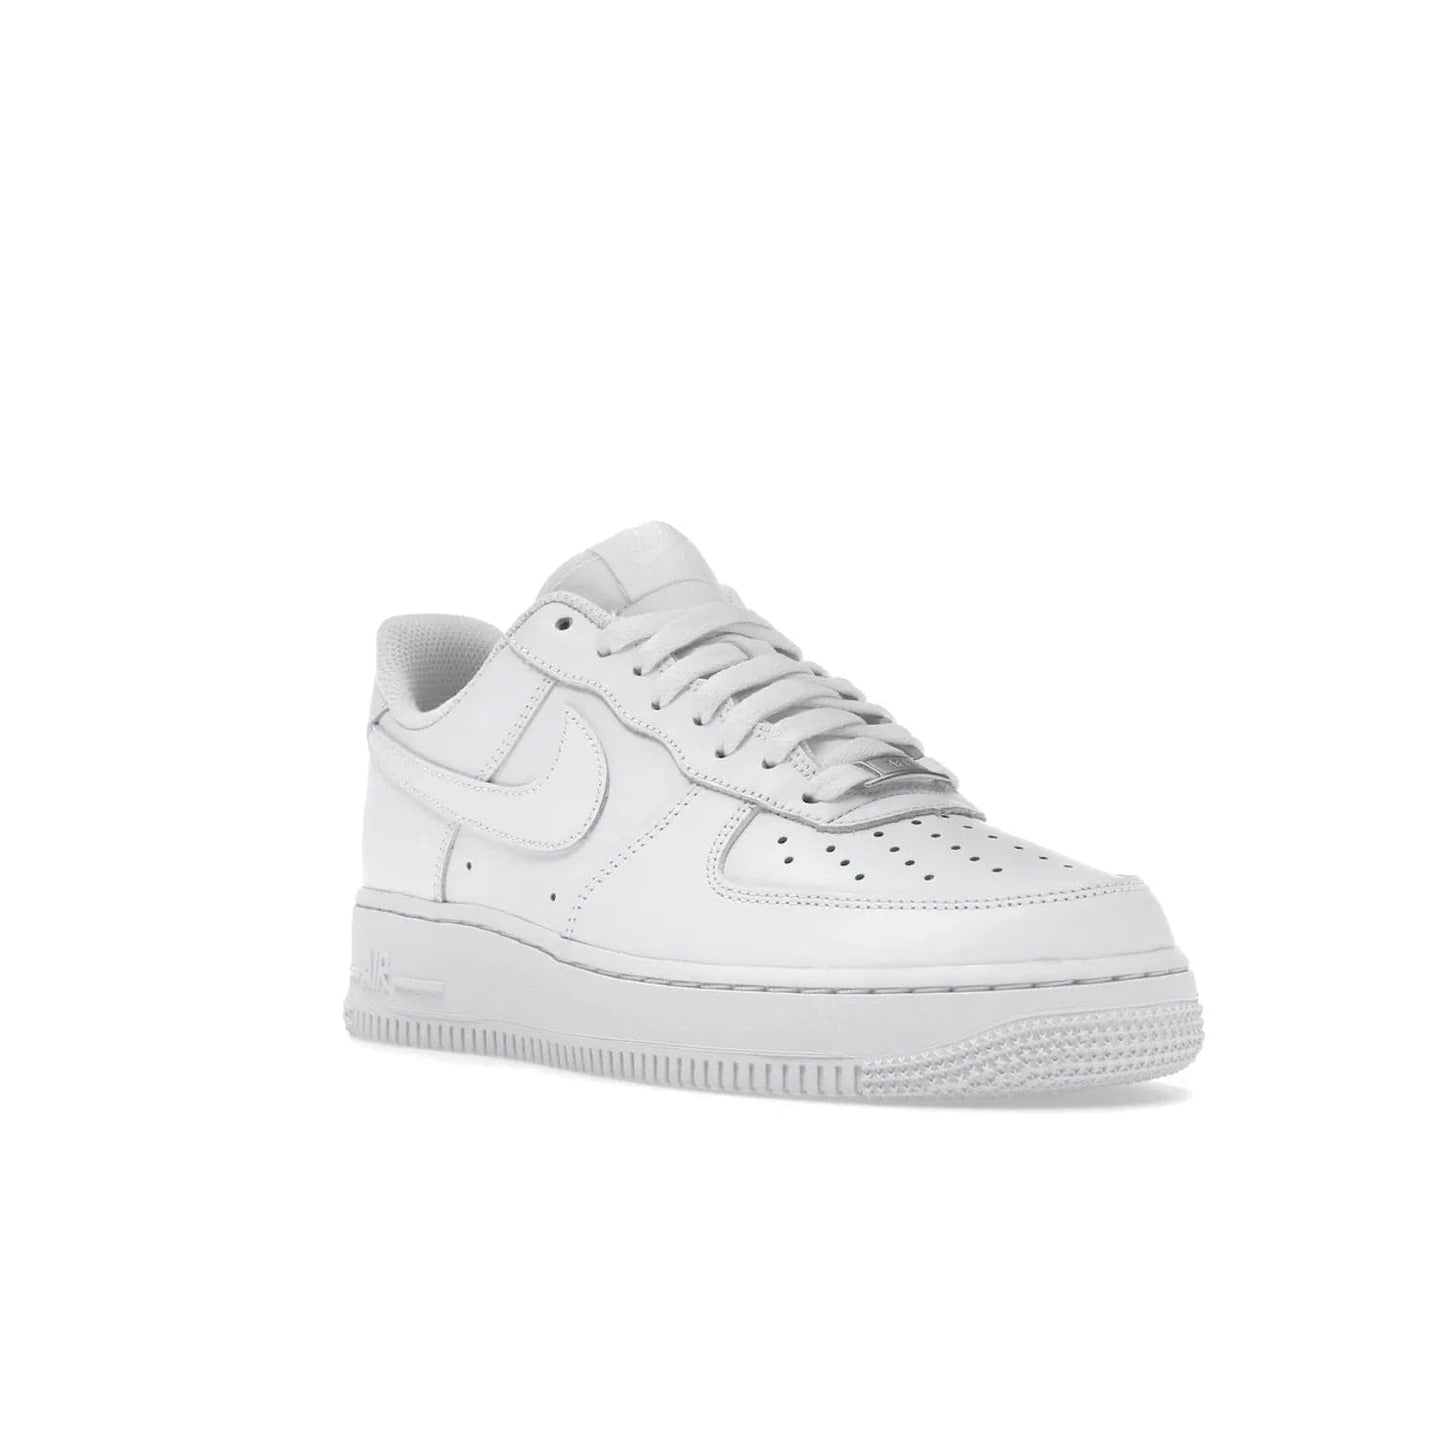 Nike Air Force 1 Low '07 White (Women's) - Image 6 - Only at www.BallersClubKickz.com - Timeless classic sneaker updated with white leather upper and perforated toe box. Nike heel embroidery and white sole. Released January 2018.